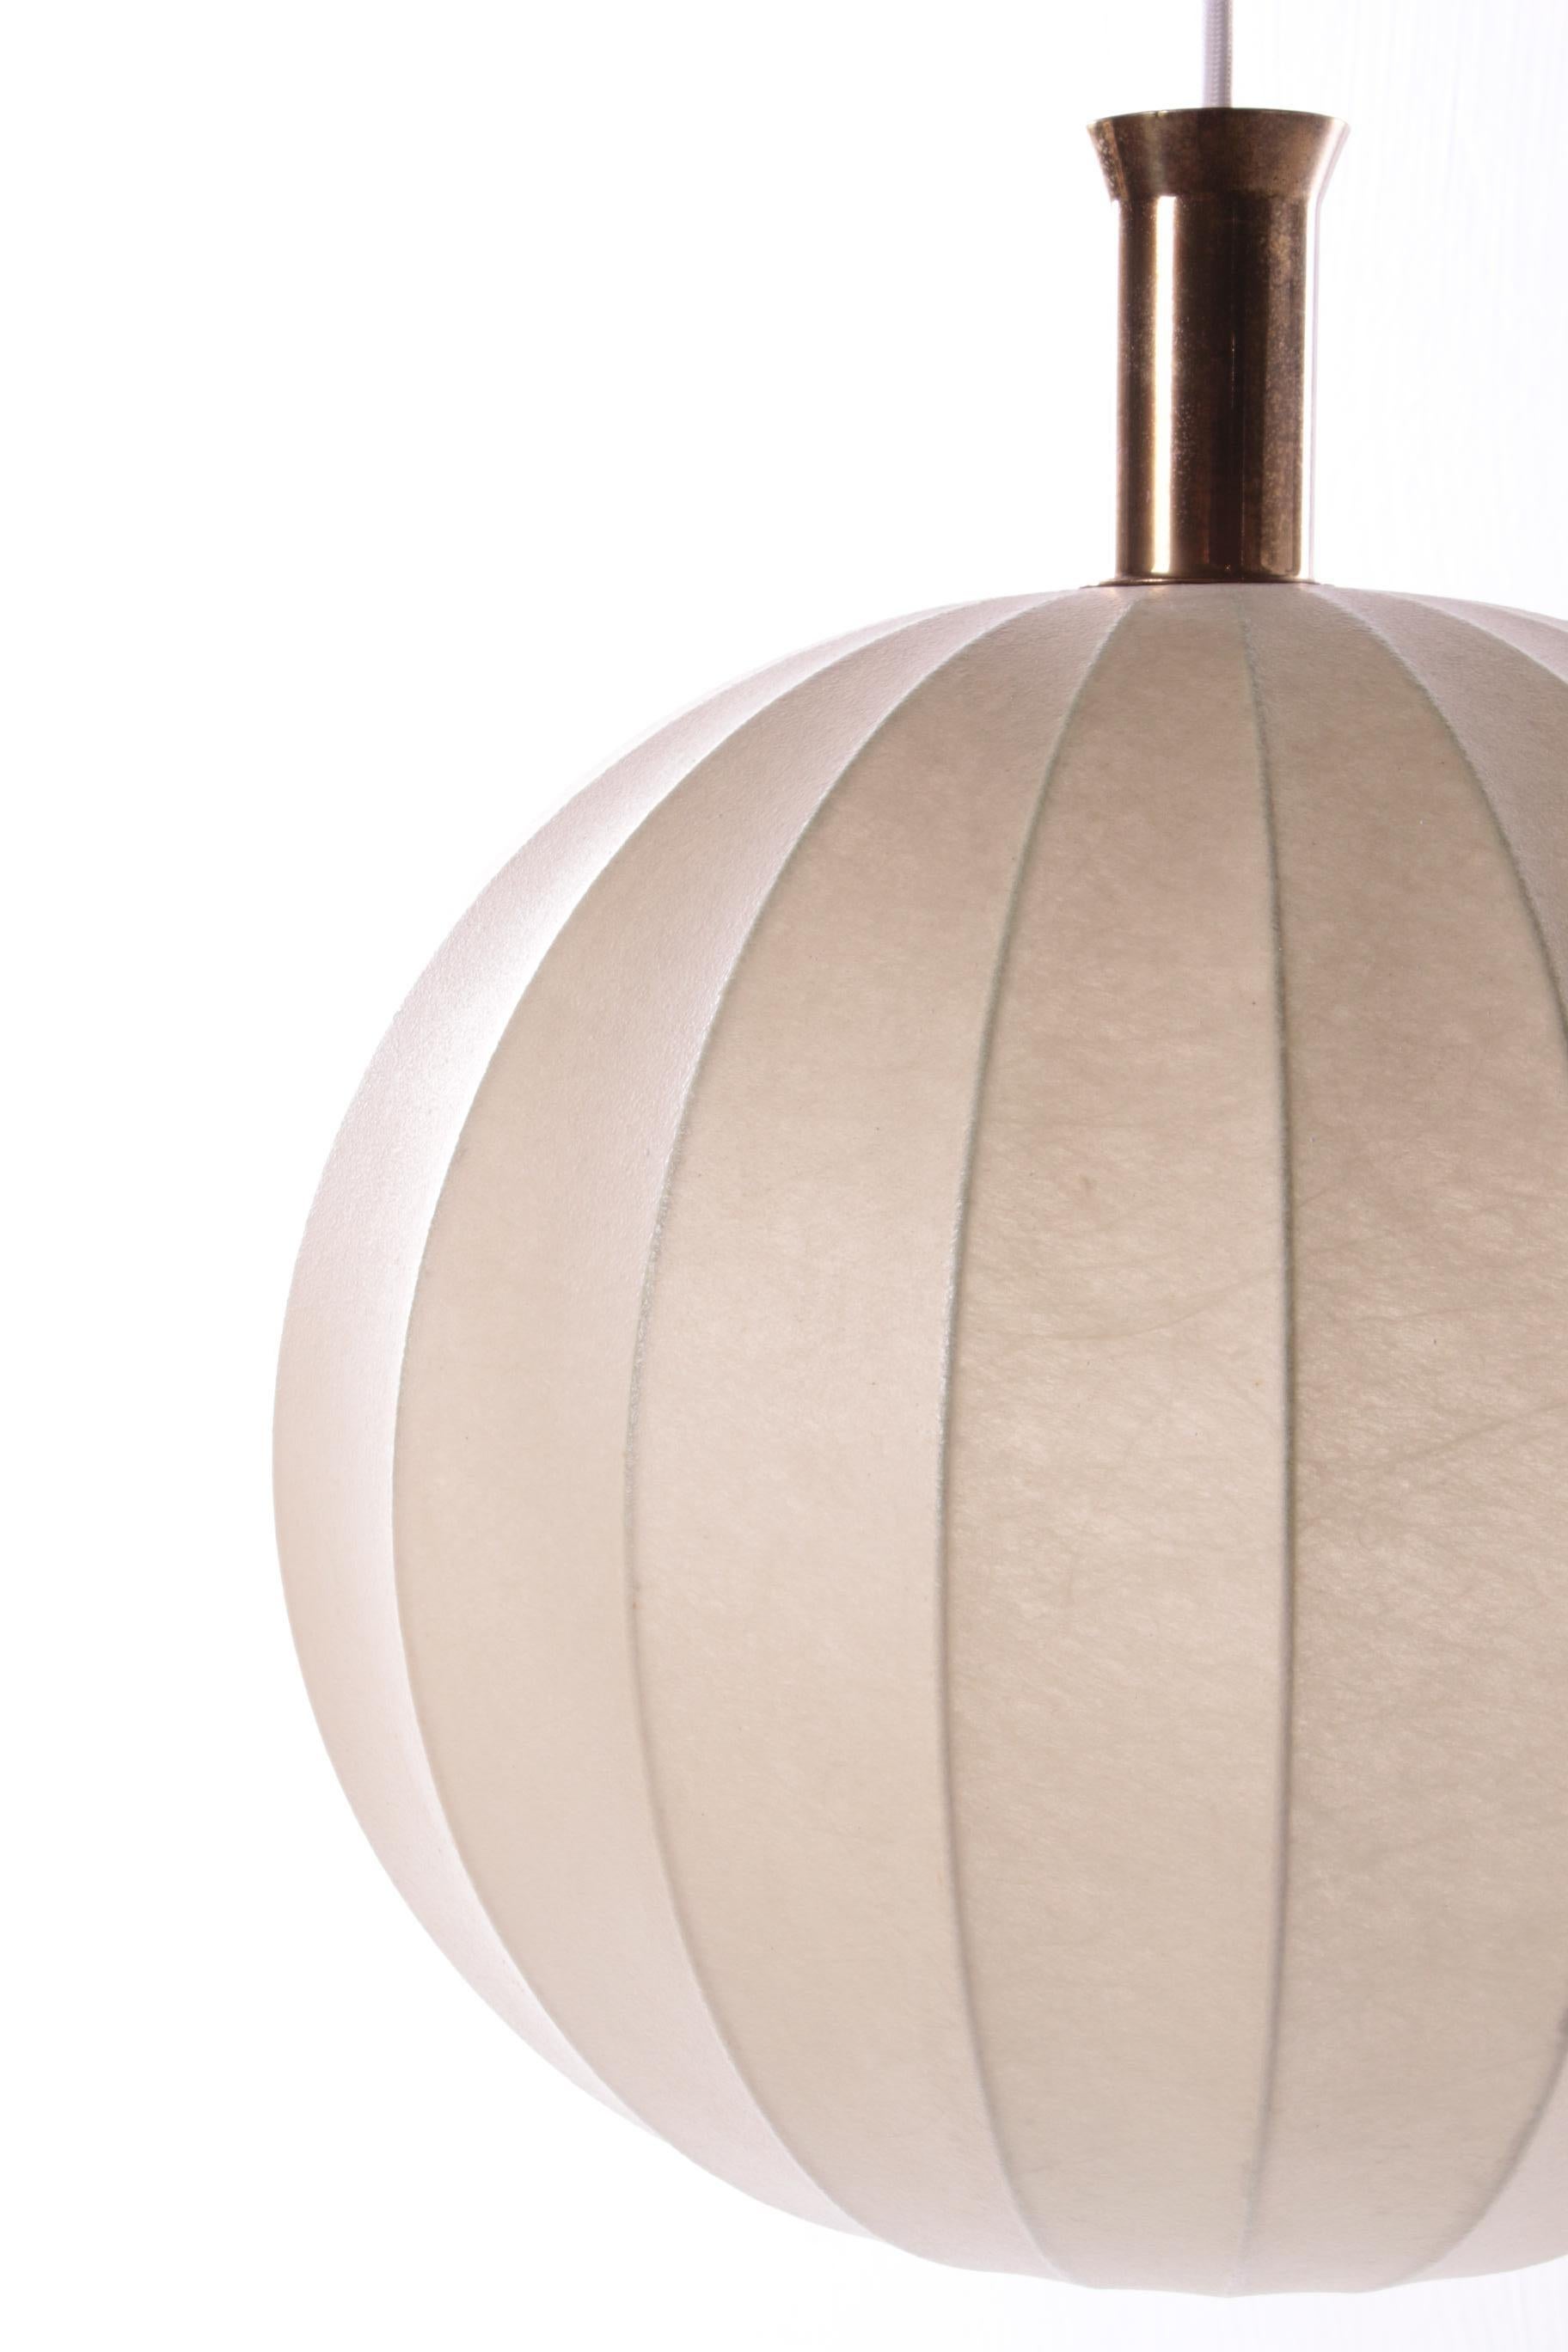 Mid-Century Modern Cocoon Pendant Lamp by Achille Castiglioni for Flos, 1960s